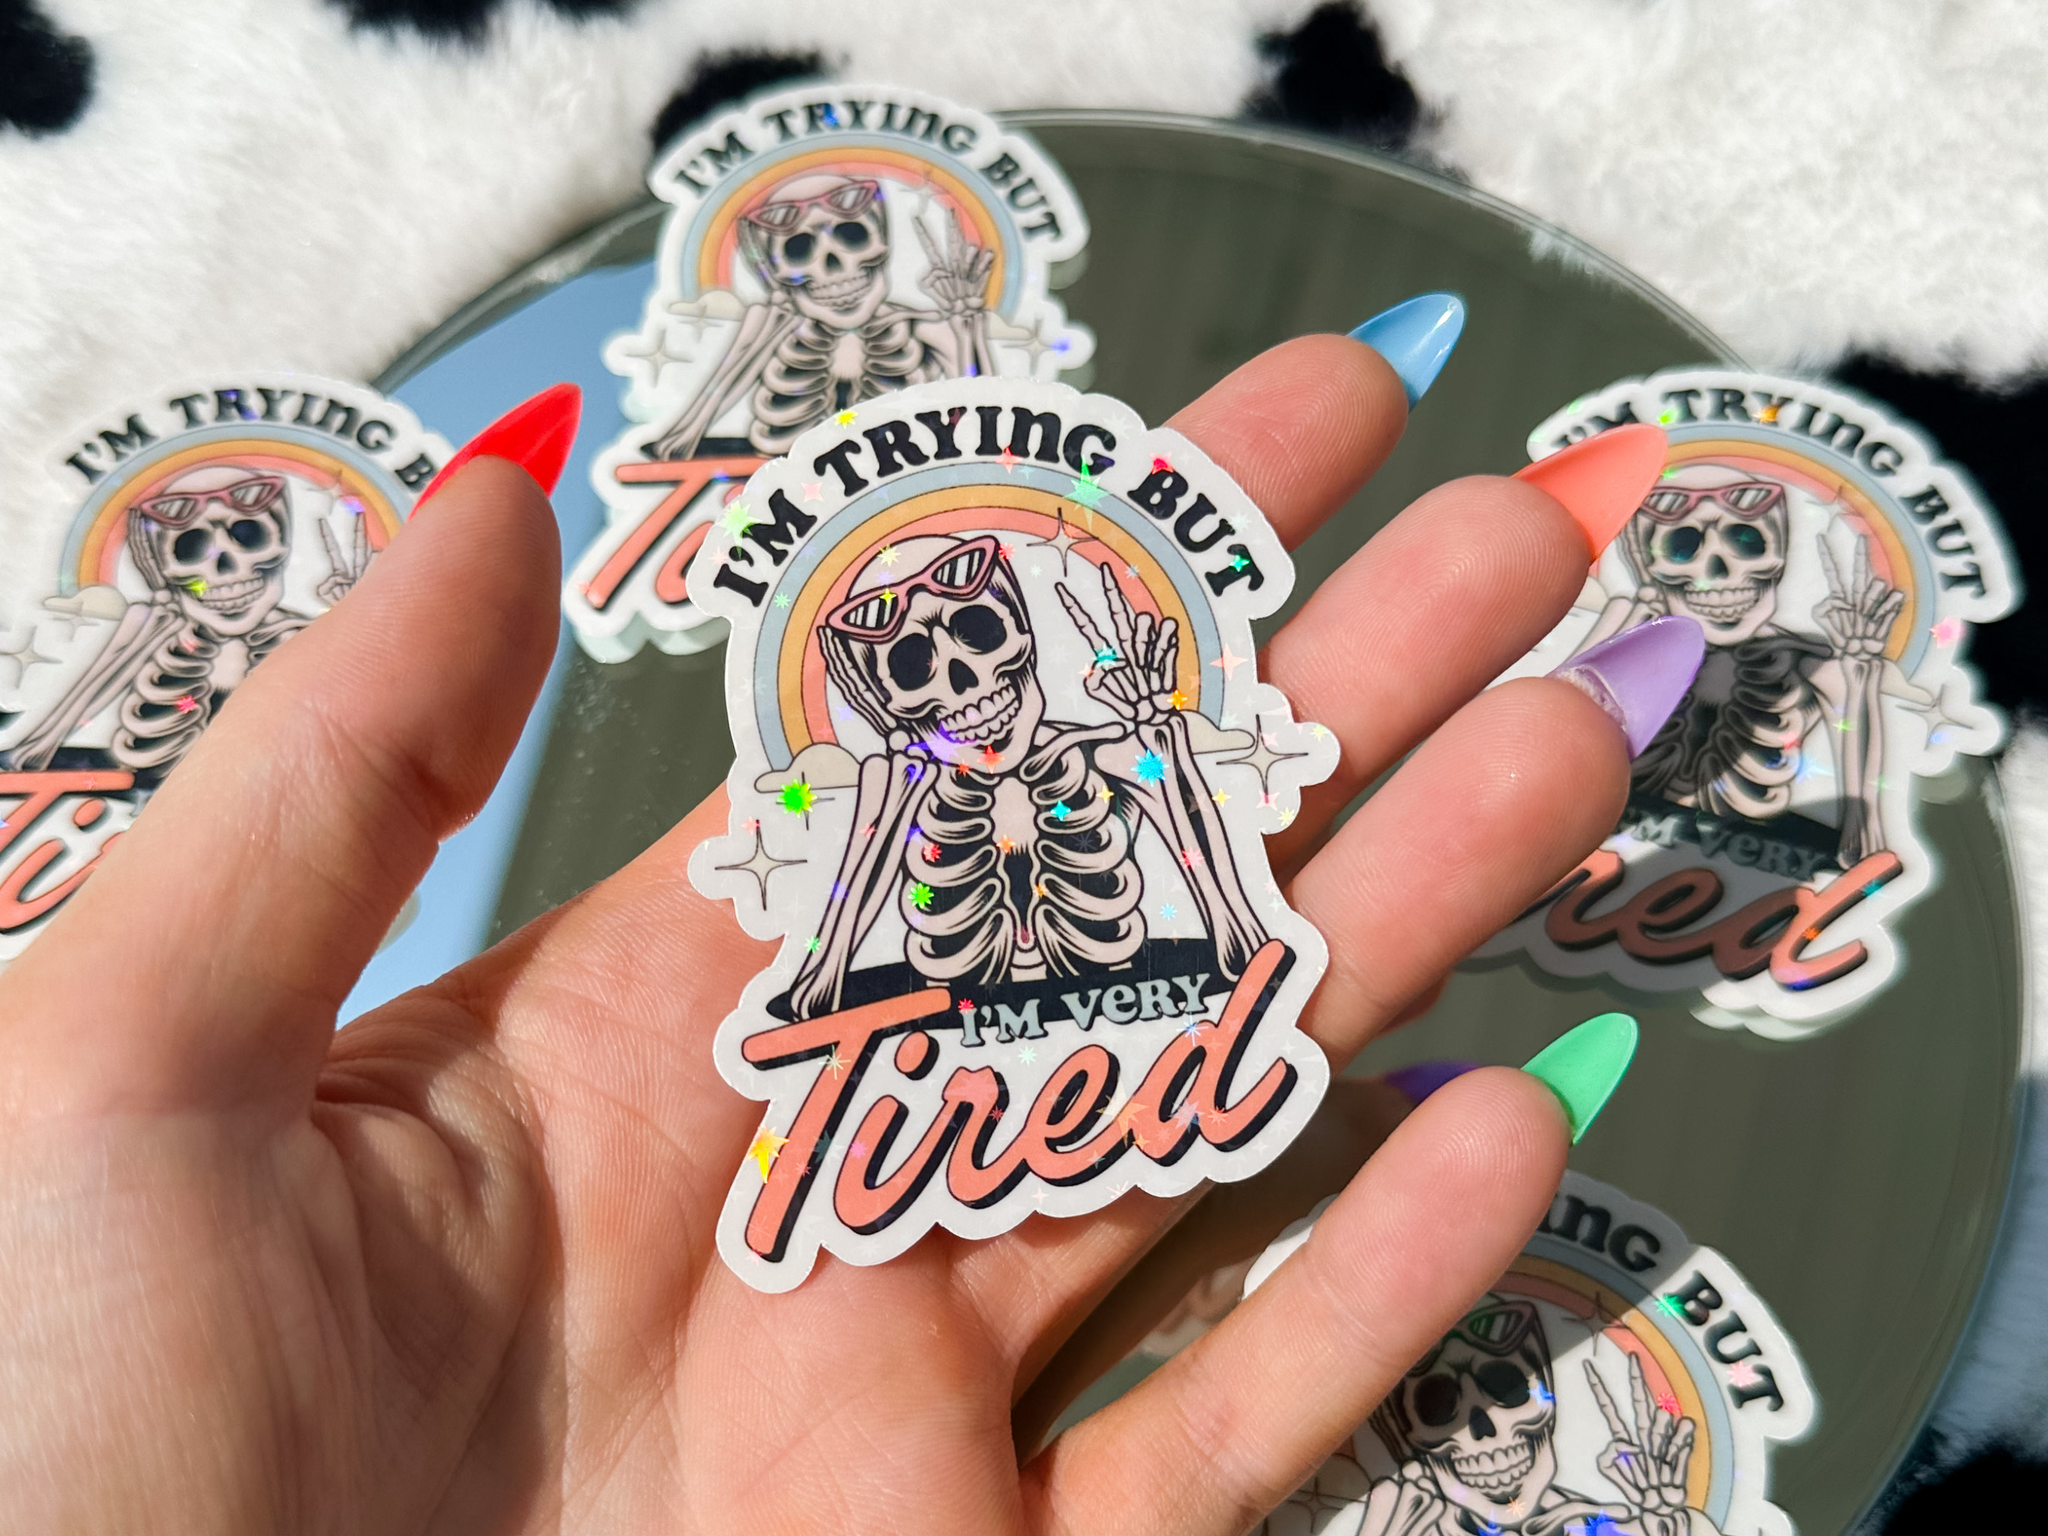 "I'm Trying But I'm Very Tired" Holographic Sticker